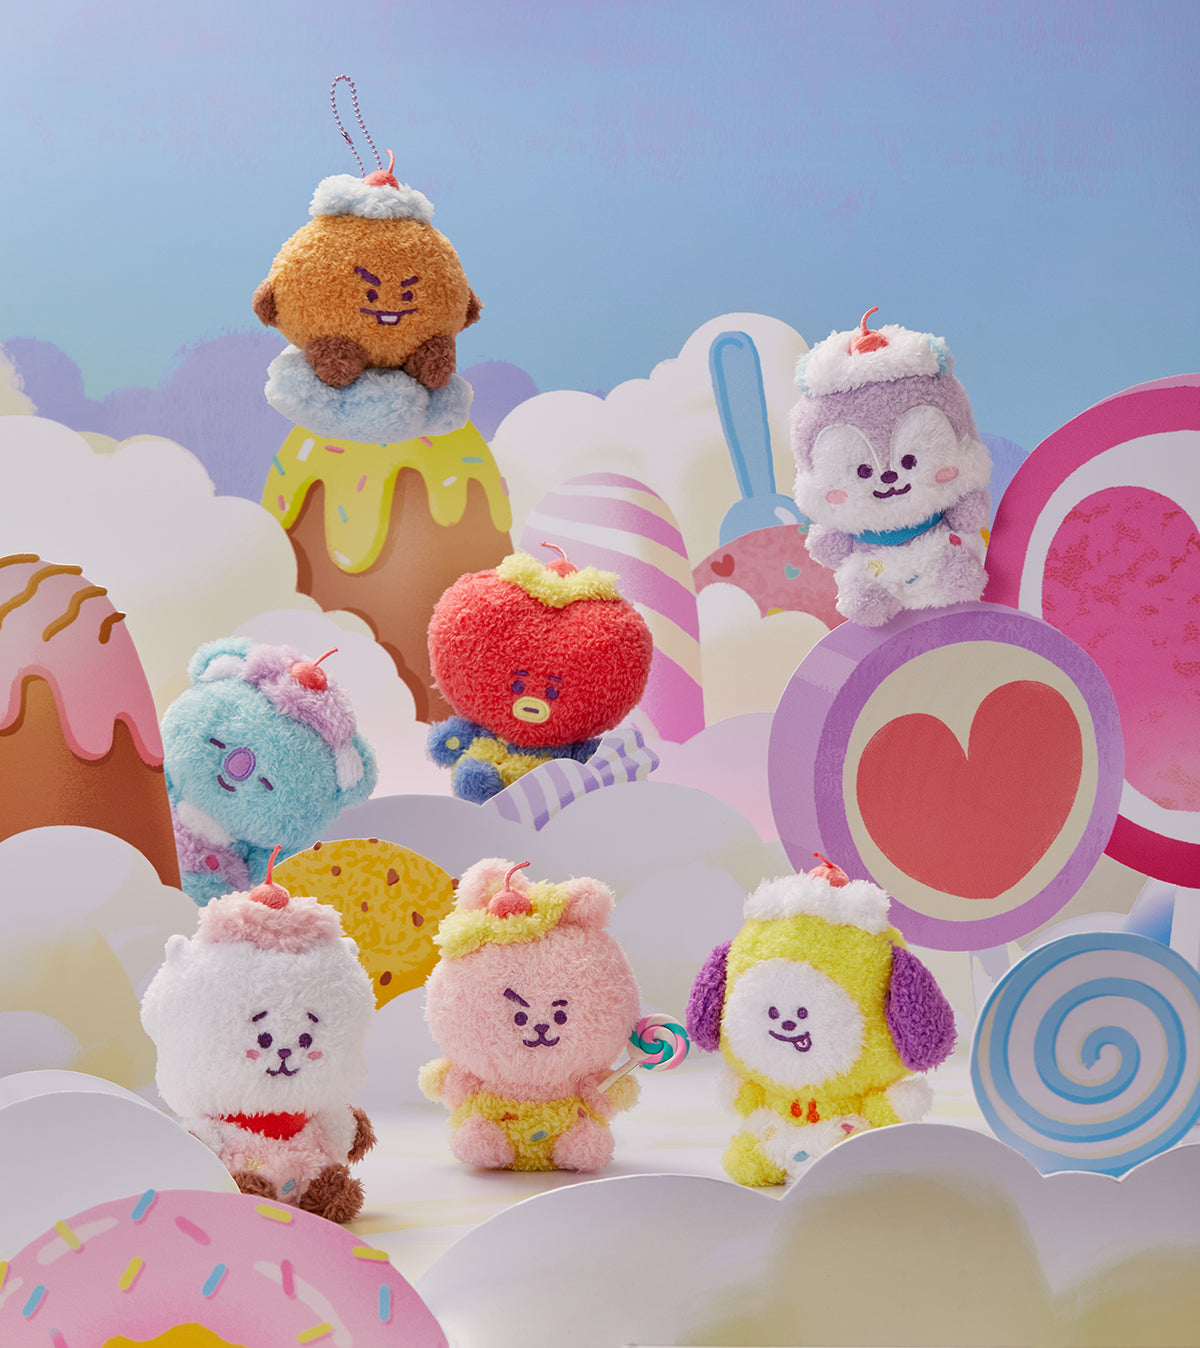 BT21 ON THE CLOUD DOLL KEYRING - COKODIVE